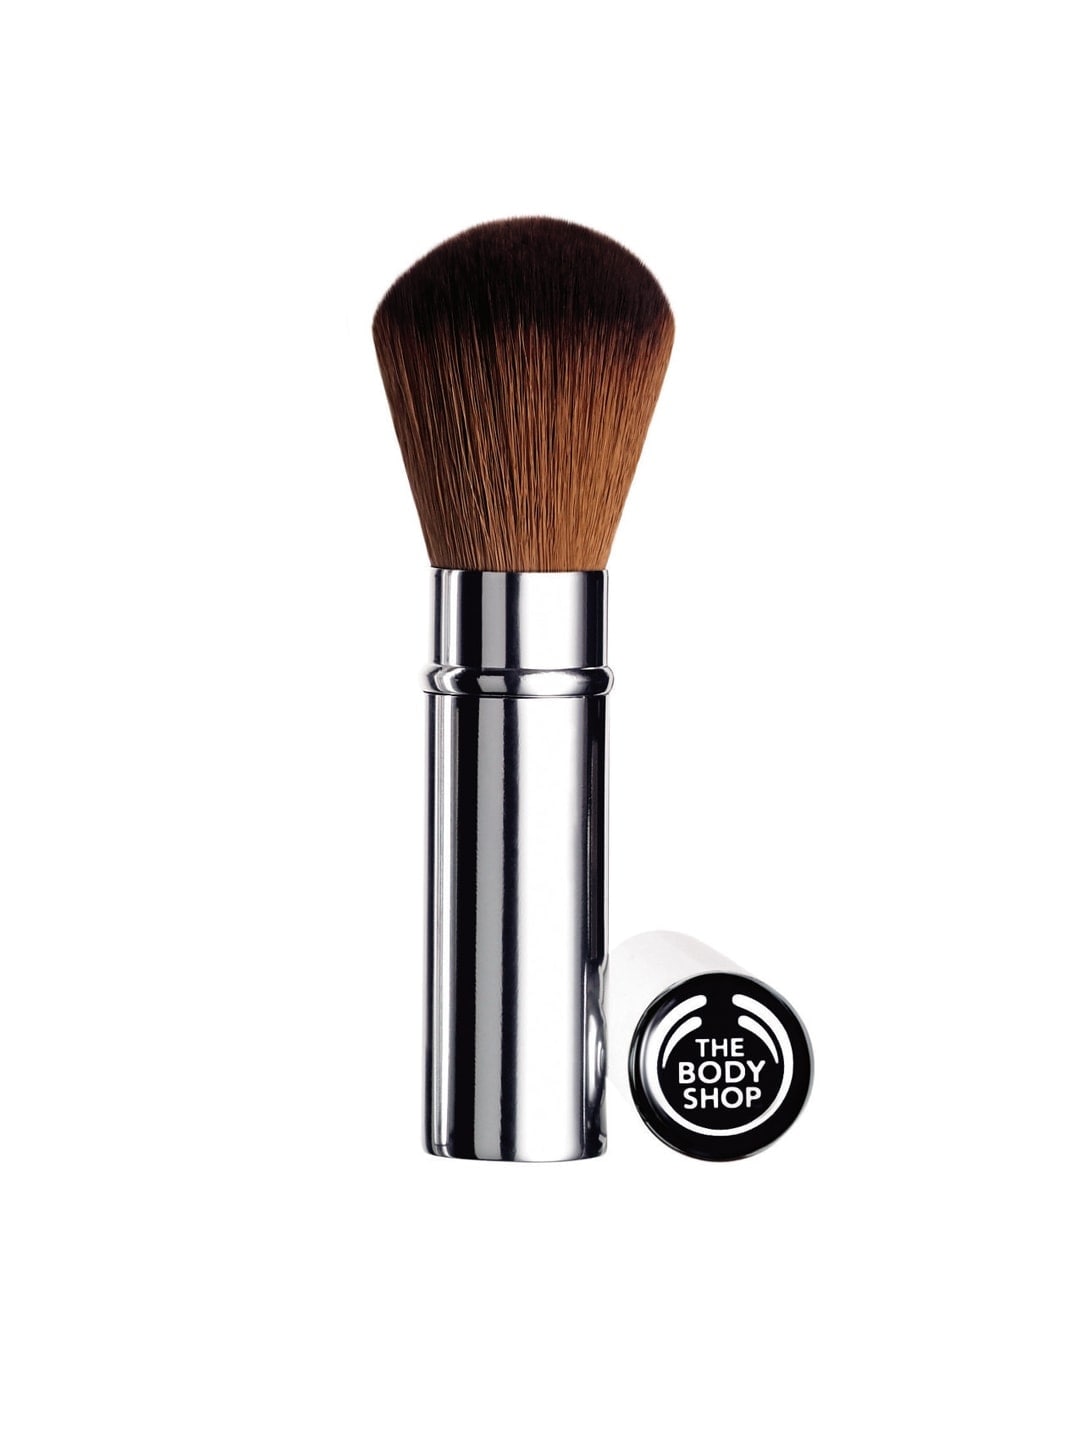 THE BODY SHOP Retractable Sustainable Blusher Brush Price in India